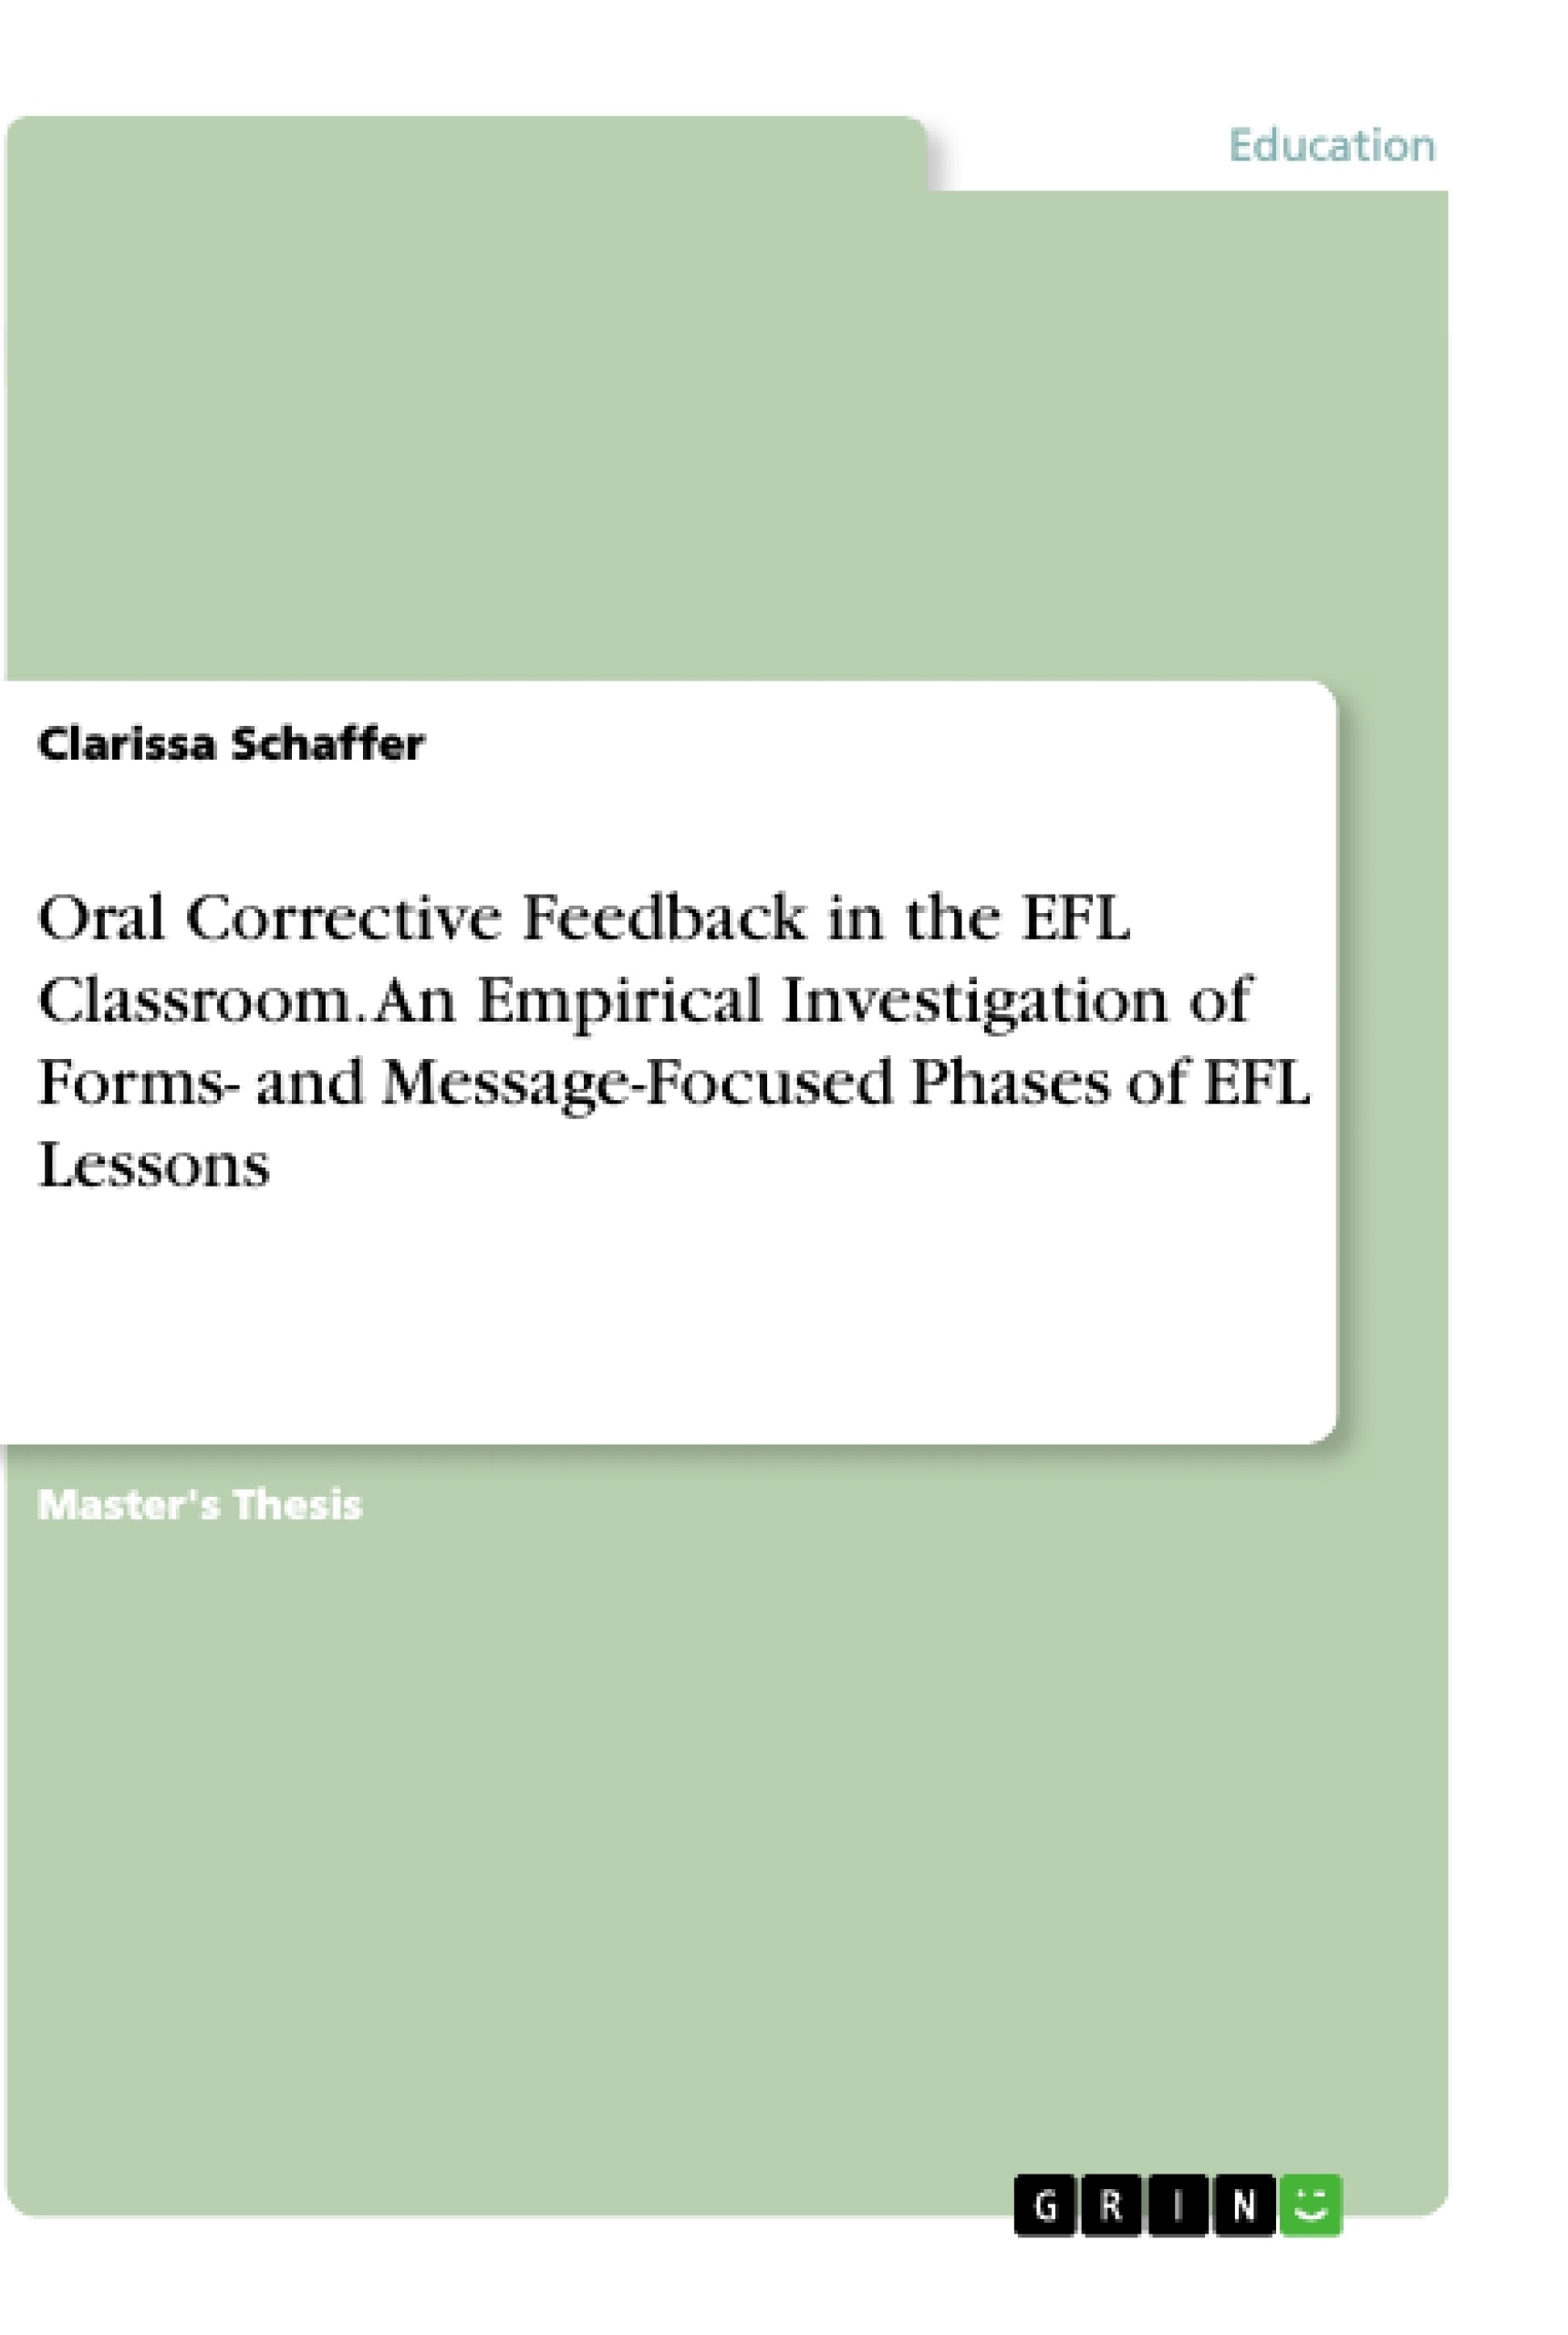 Title: Oral Corrective Feedback in the EFL Classroom. An Empirical Investigation of Forms- and Message-Focused Phases of EFL Lessons